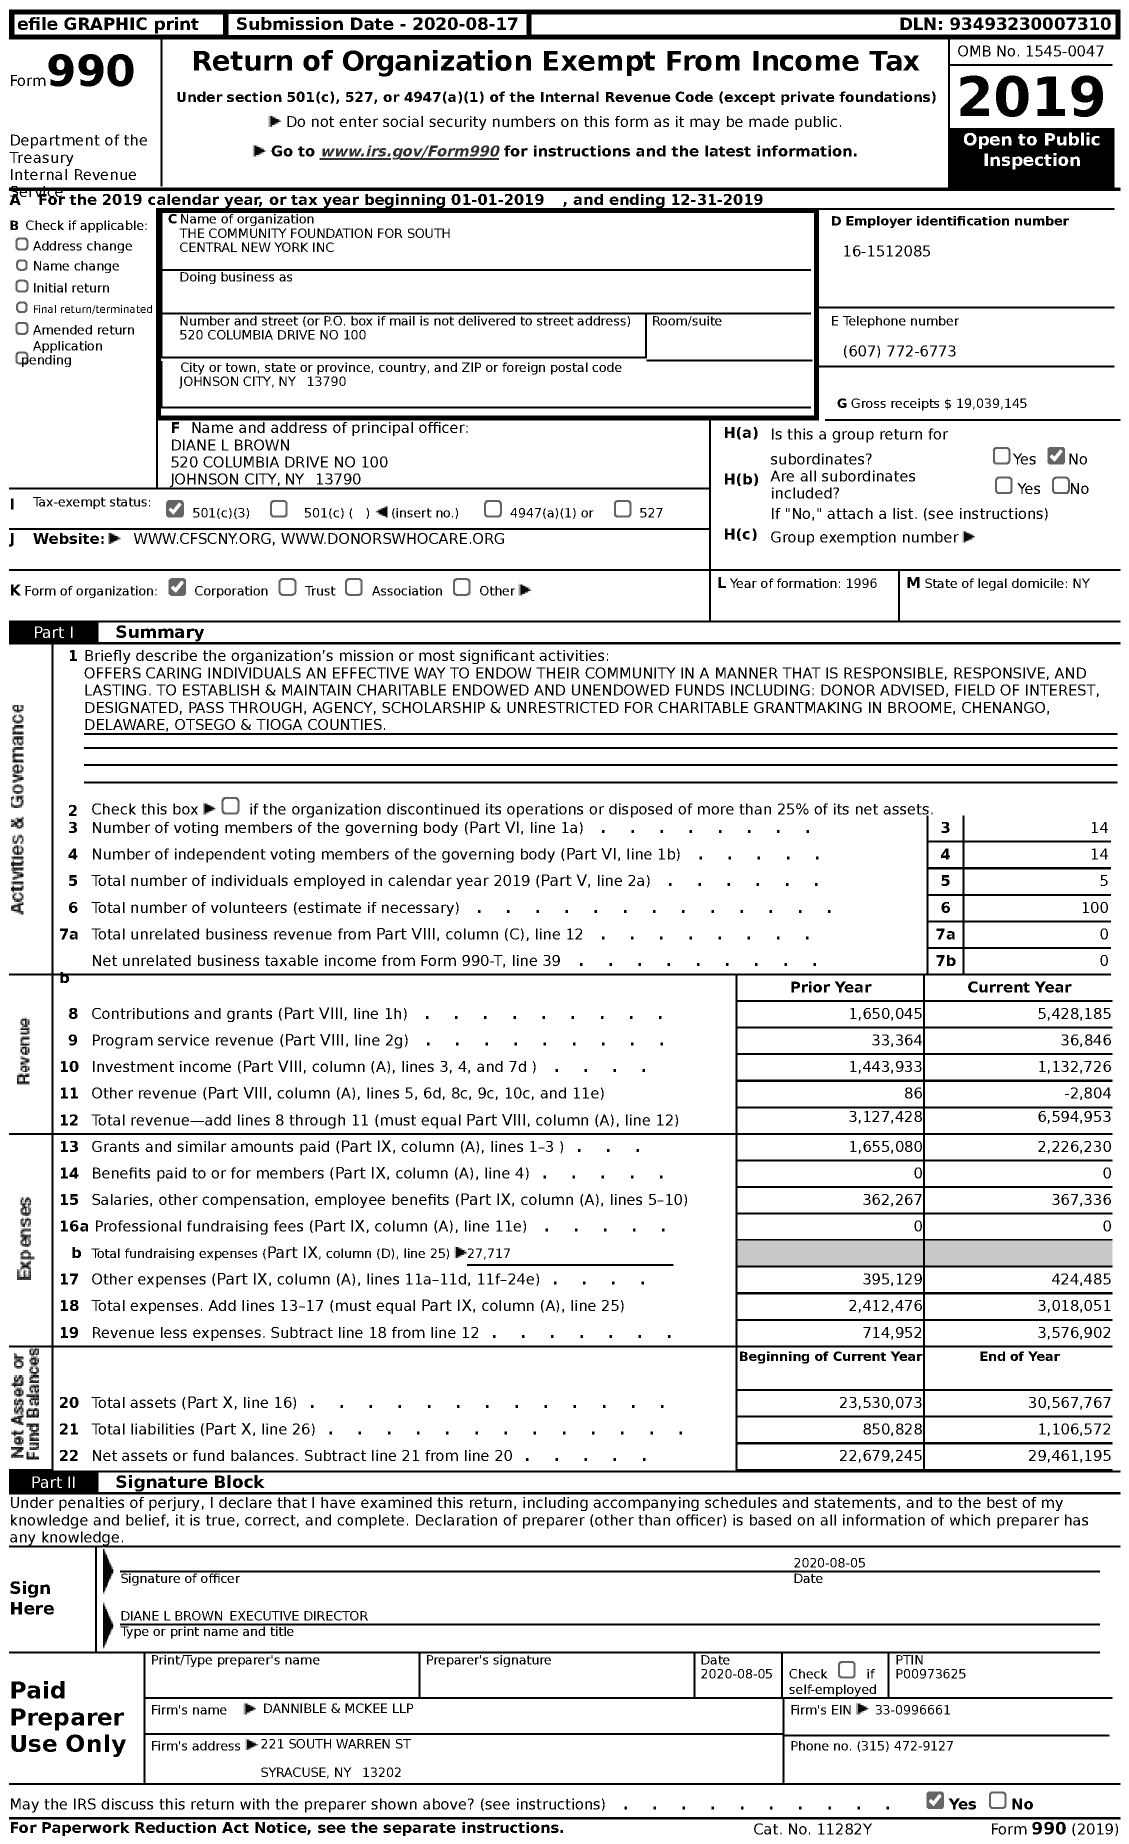 Image of first page of 2019 Form 990 for Community Foundation for South Central New York (CFSCNY)